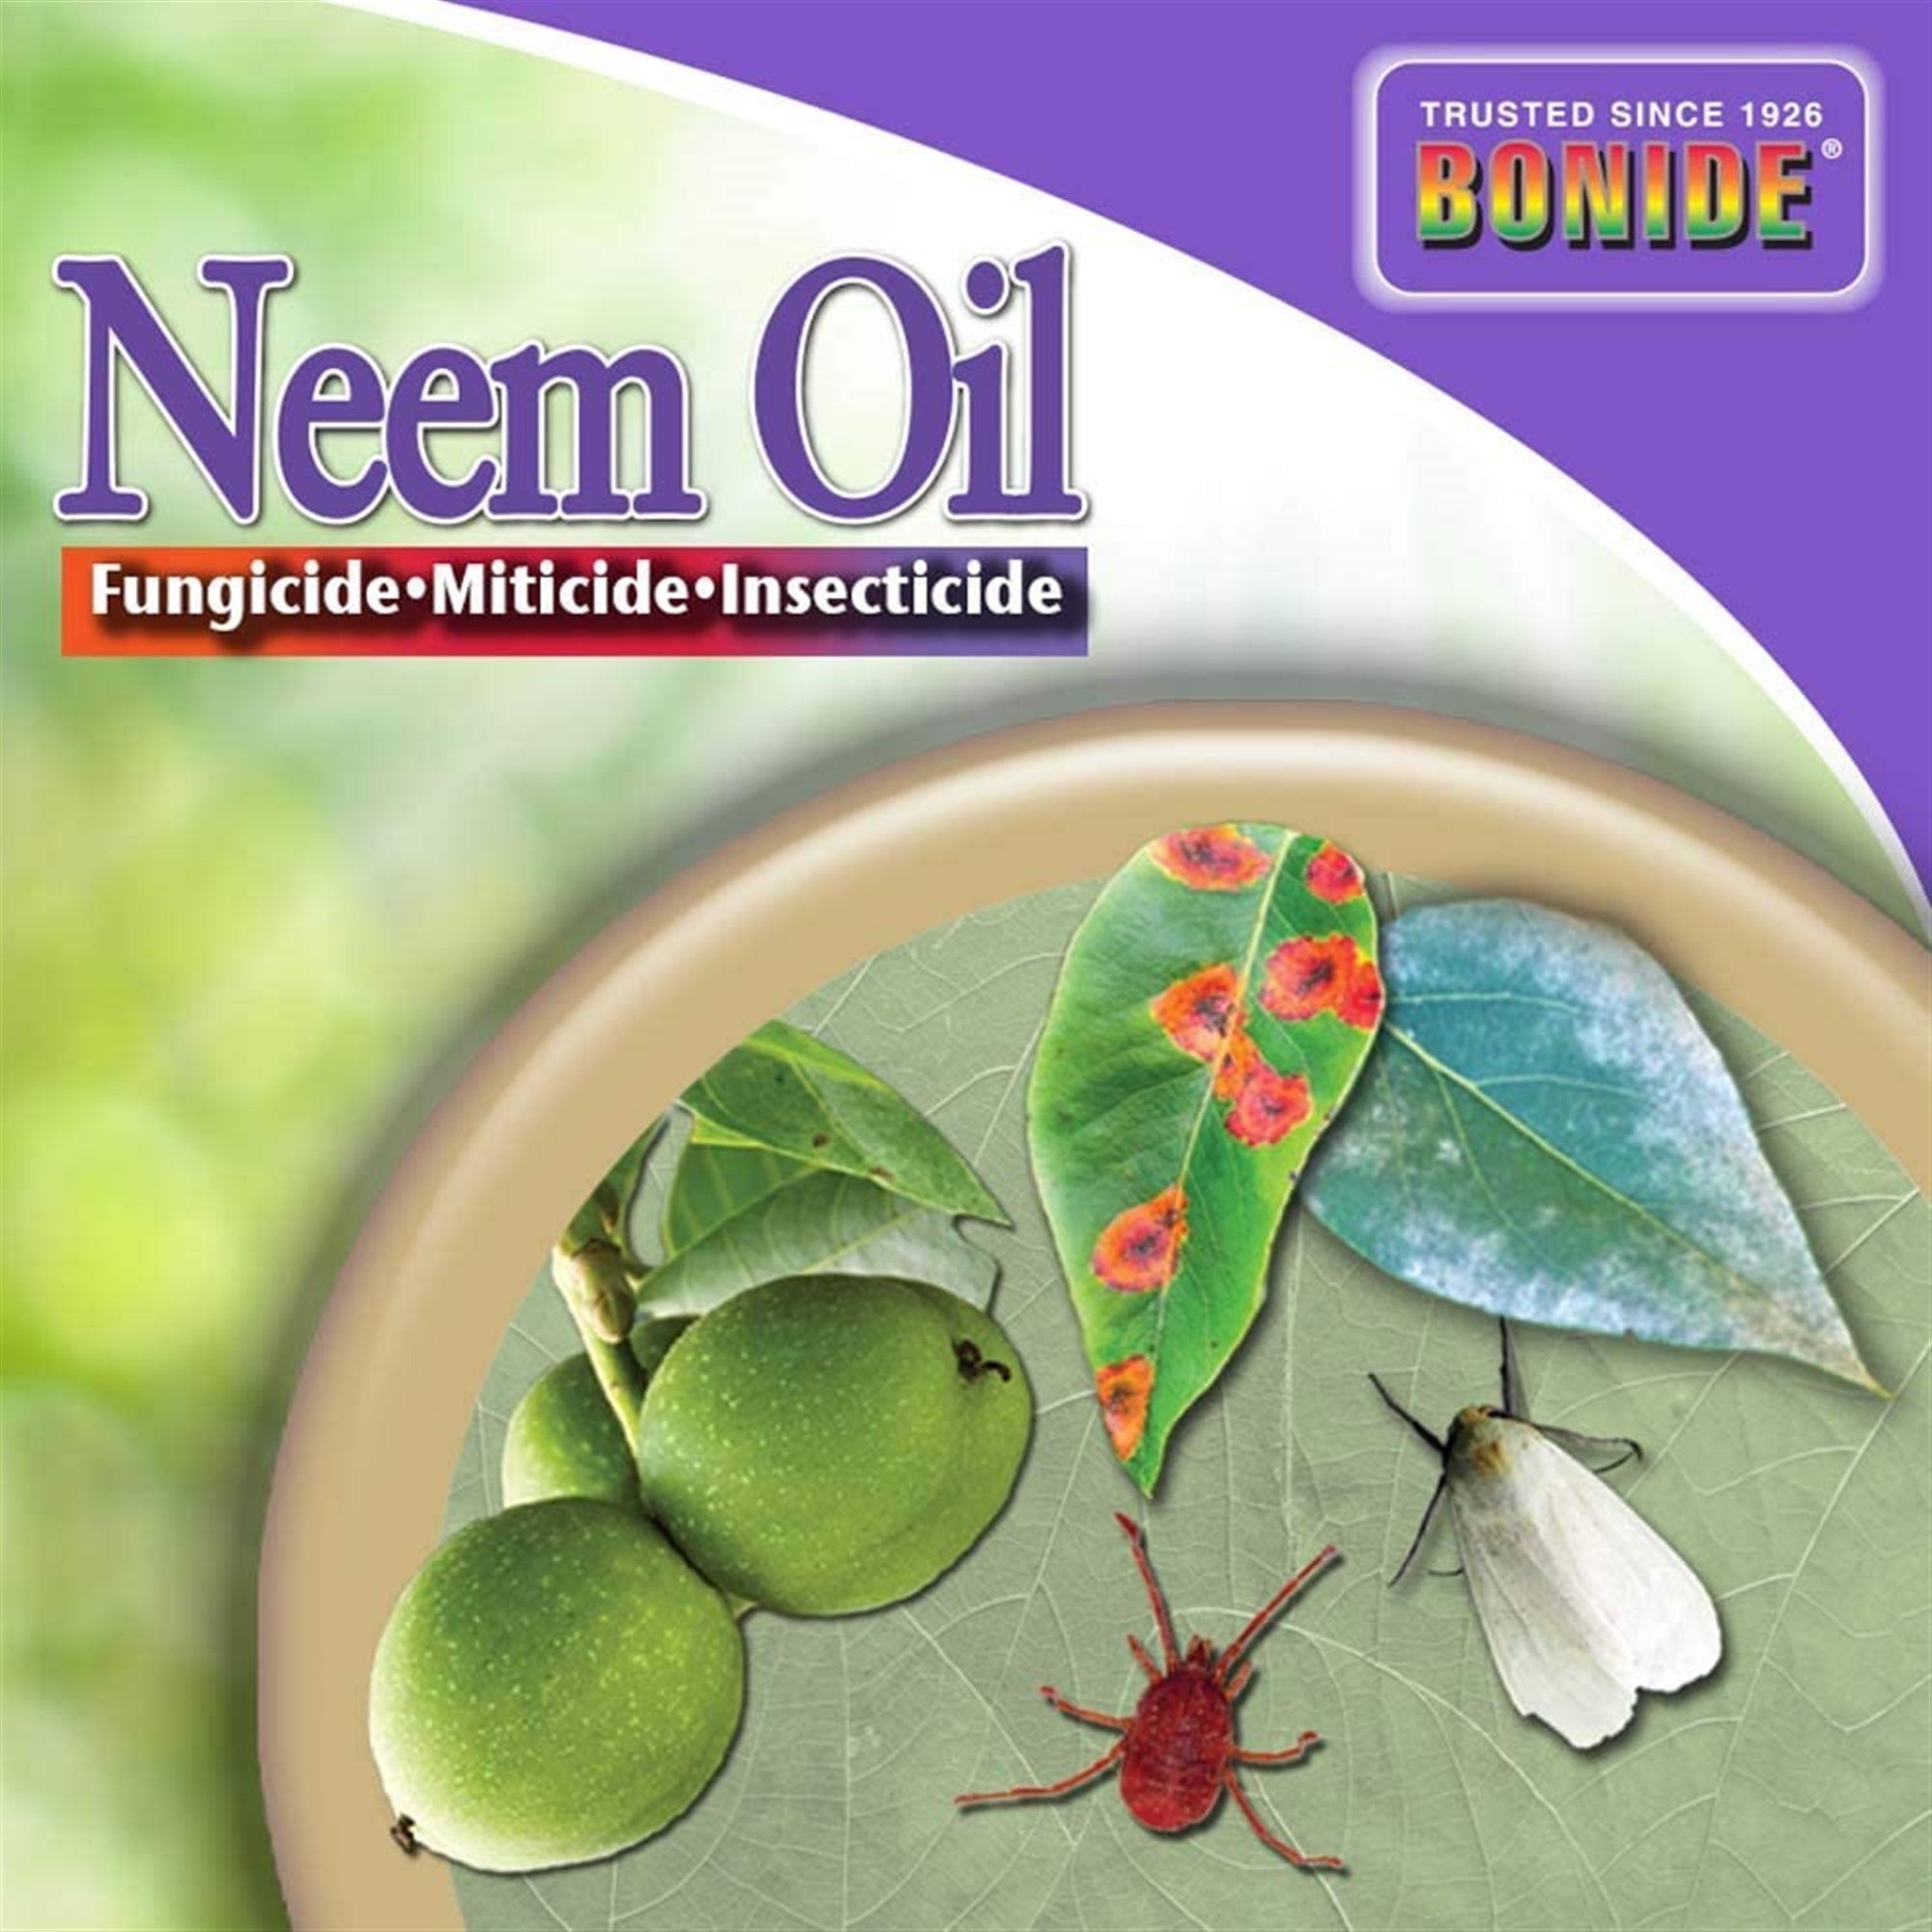 Bonide Neem Oil Fungicide, Miticide, and Insecticide Concentrate 16 fl. oz.